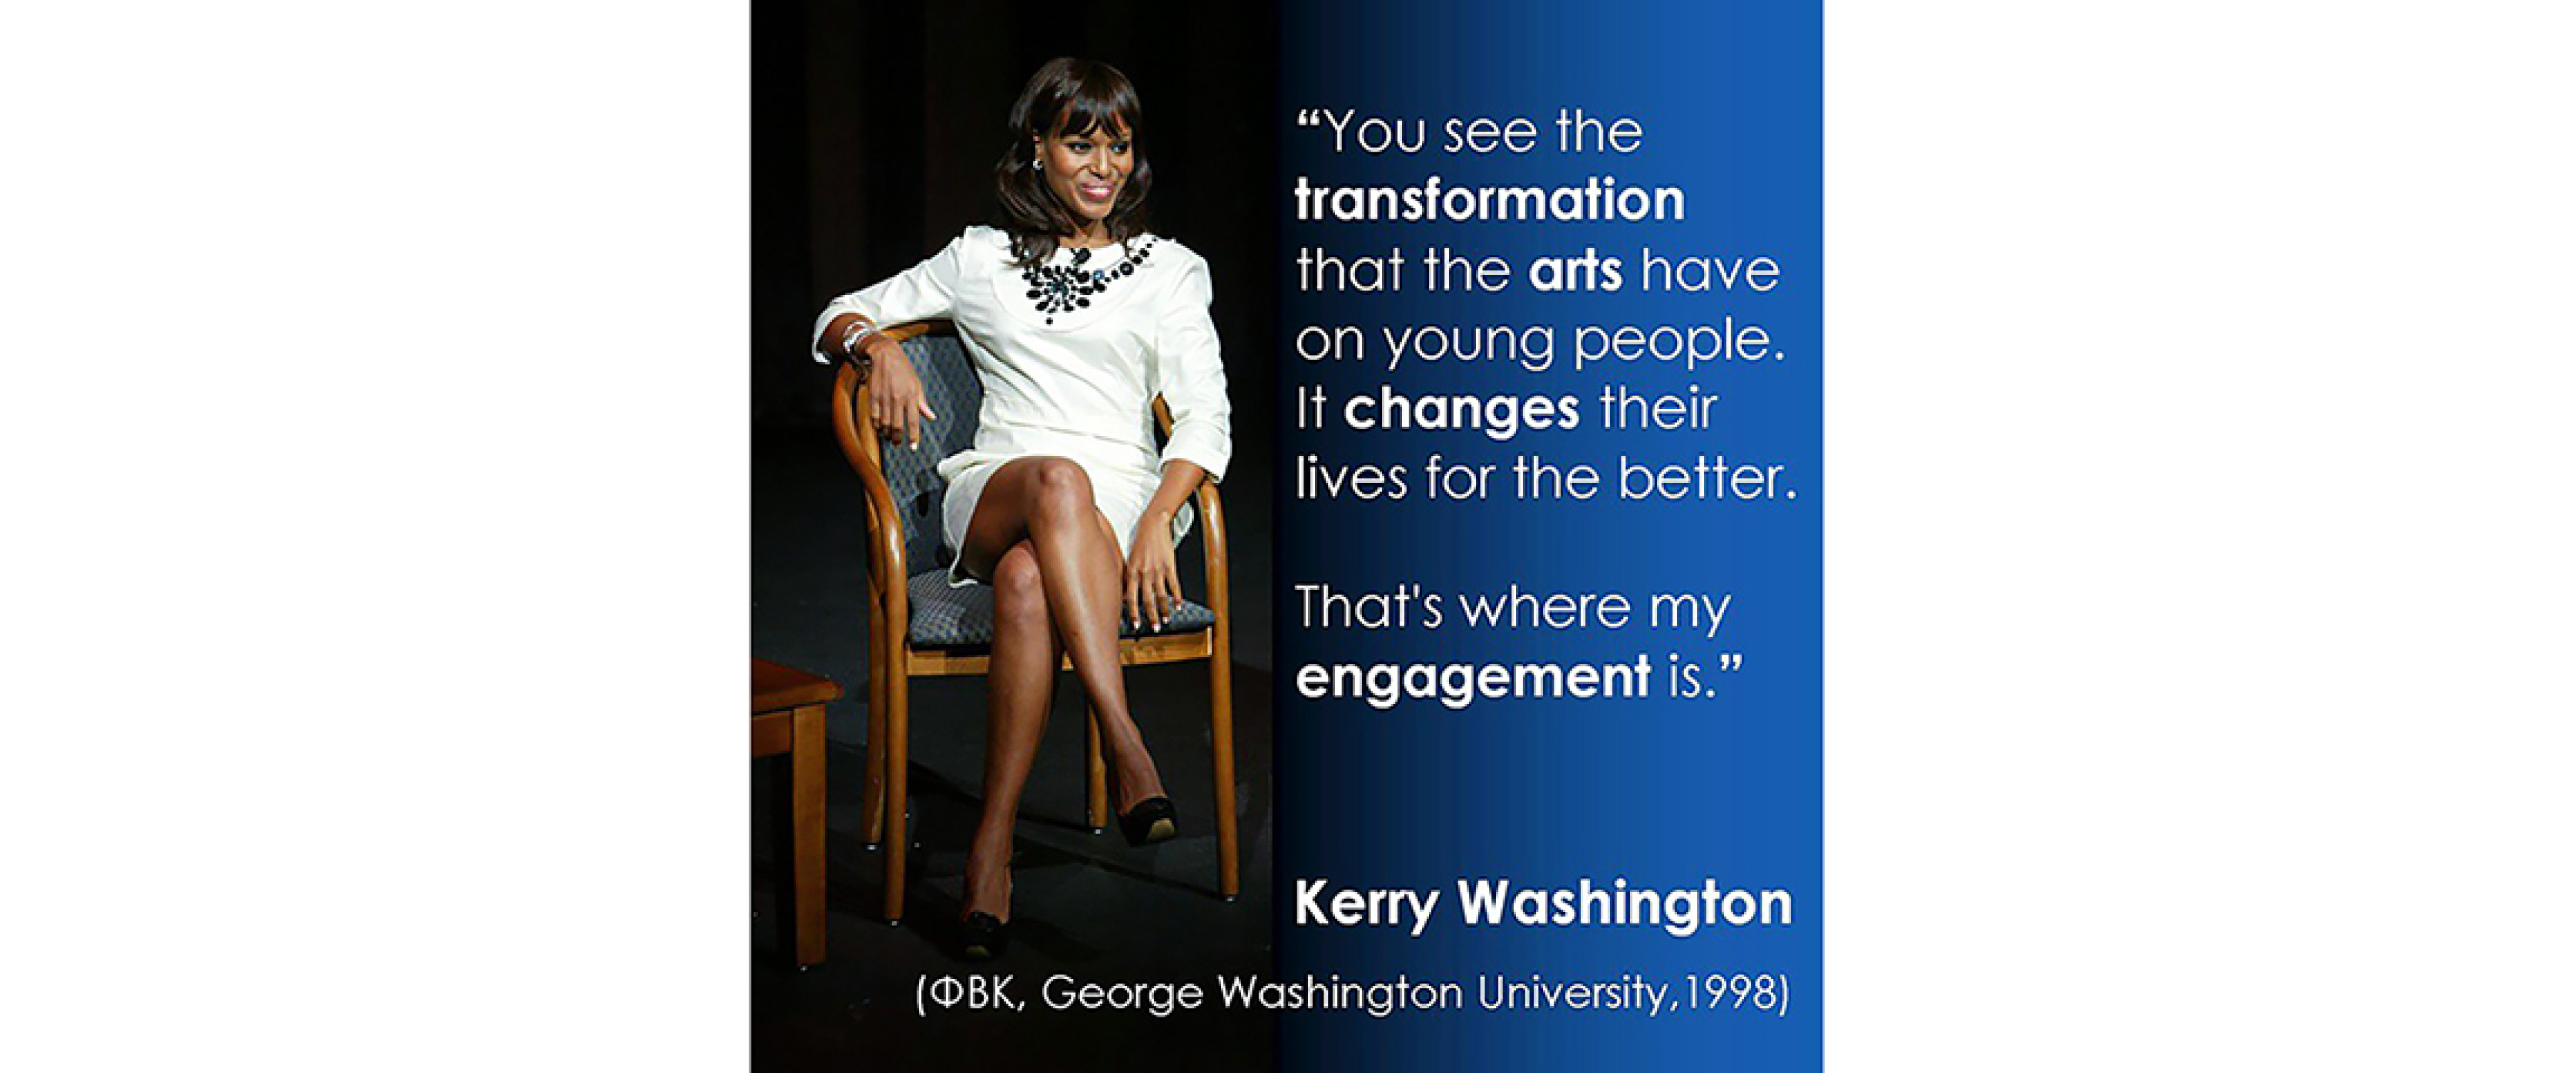 Kerry Washington, PBK George Washington University - "You see the transformation that the arts have on young people. It changes lives for the better. That's where my engagement is."